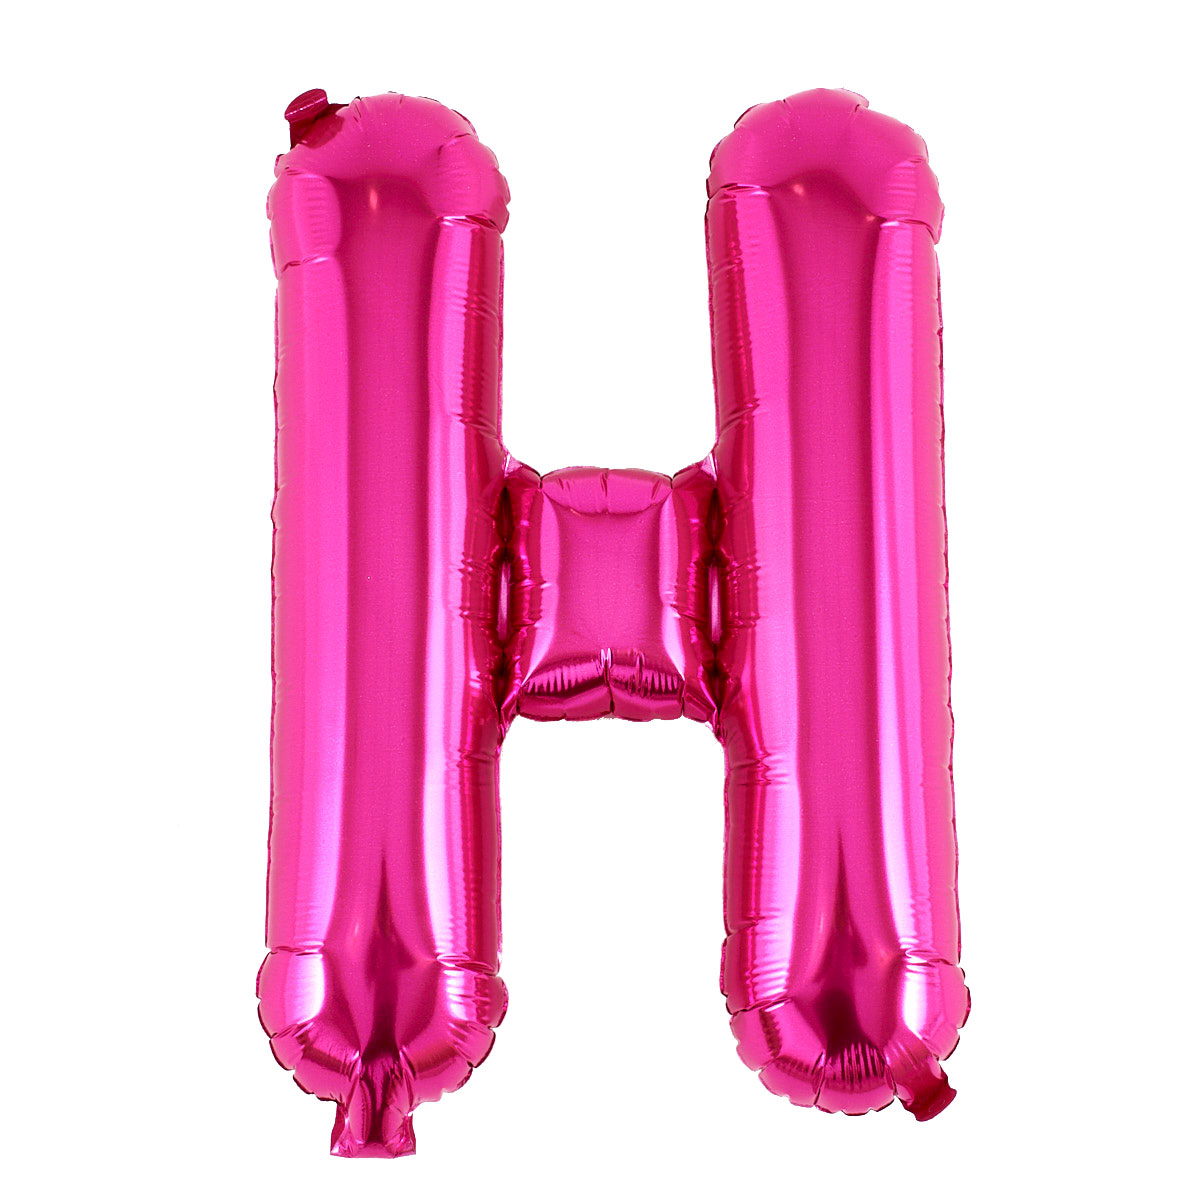 Pink Letter H Air-Inflated Balloon